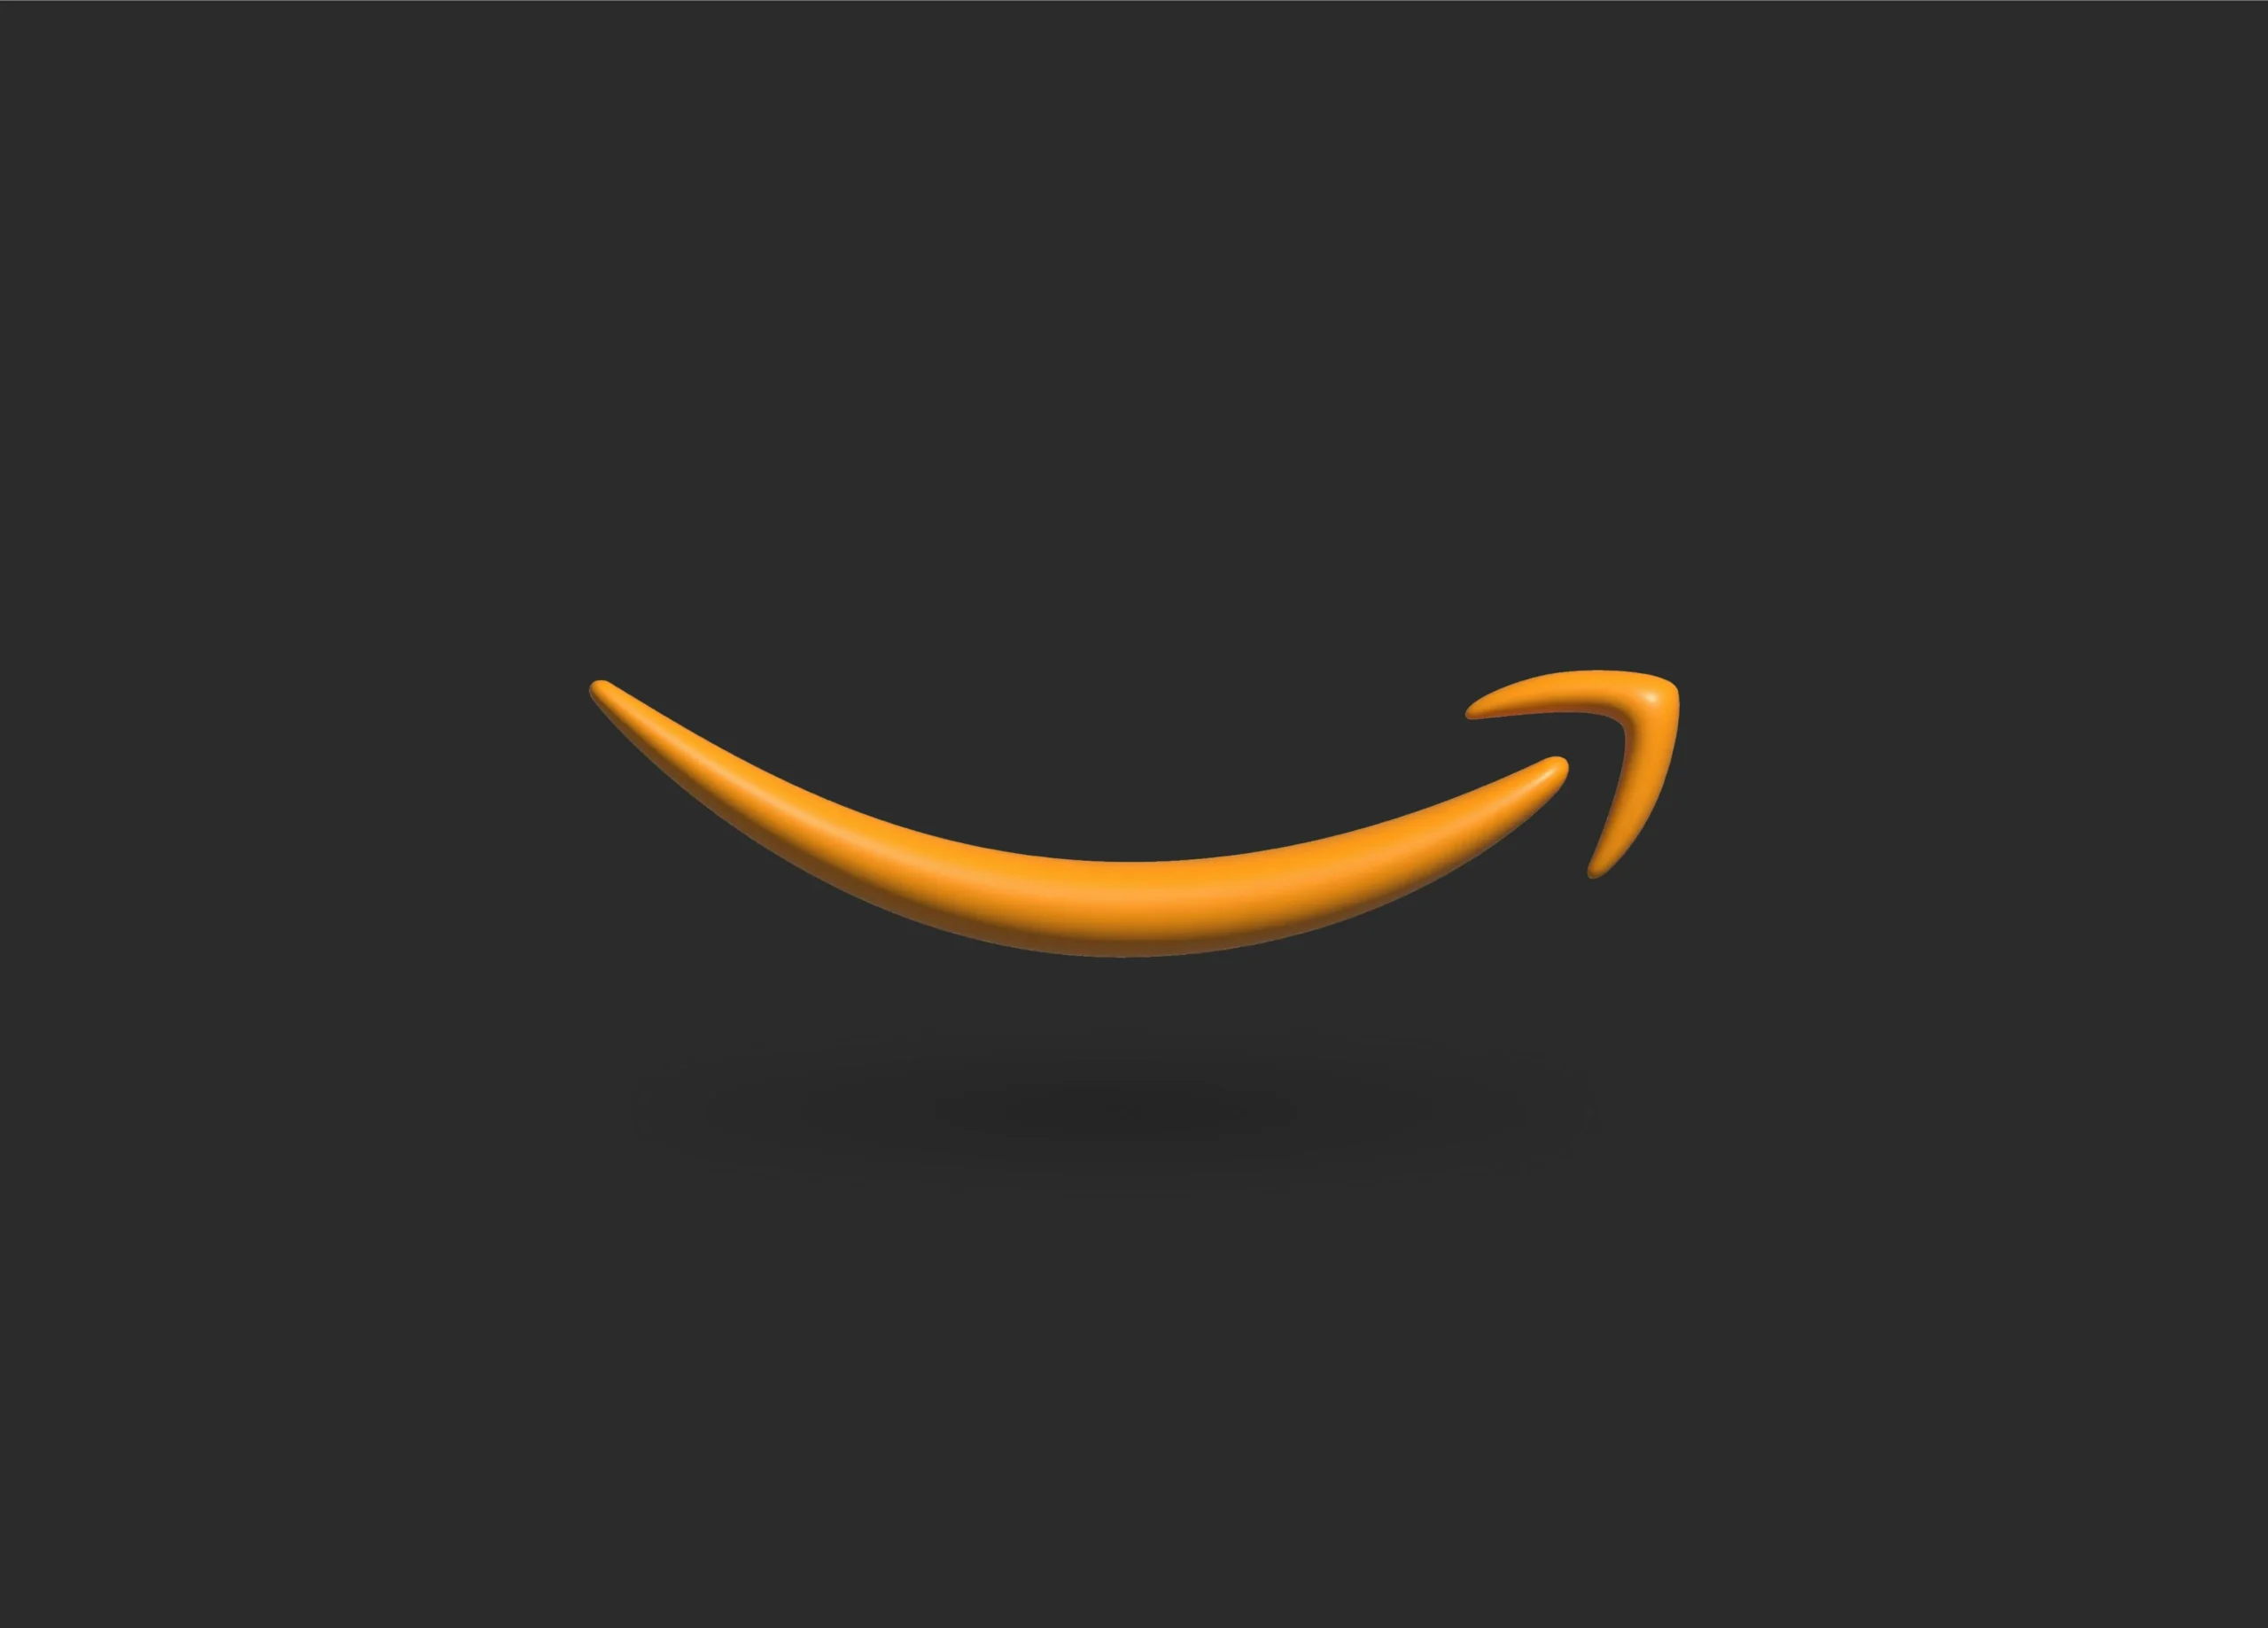 A grey background with a yellow arrow like a smile. The organizational branding mark of amazon.